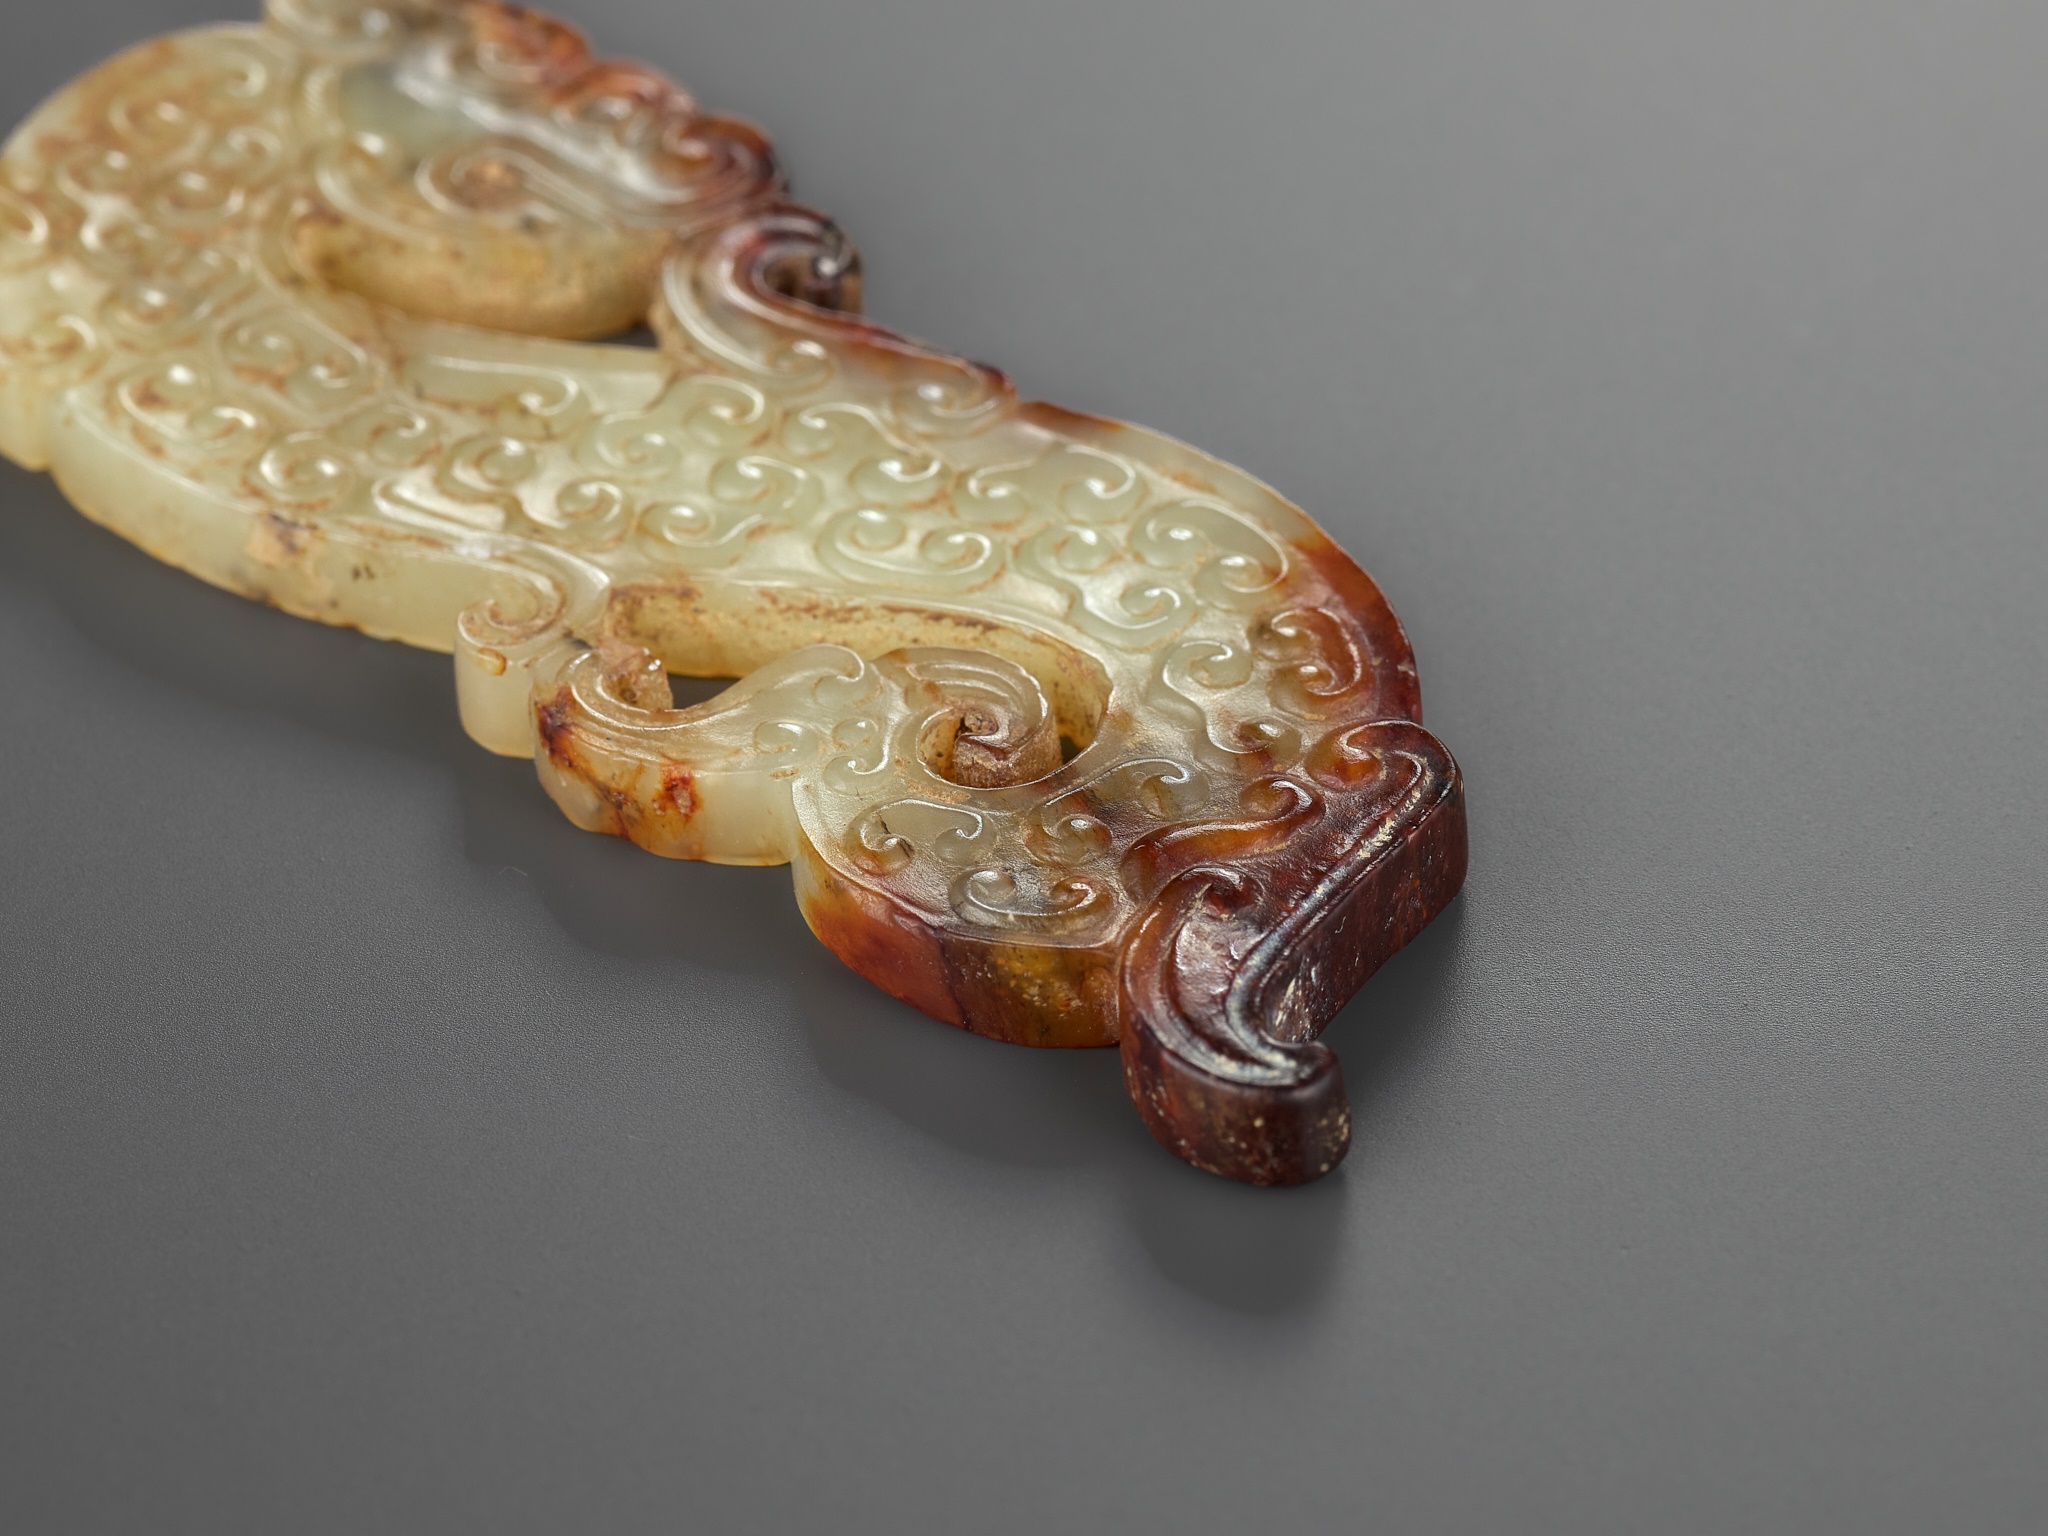 AN ARCHAIC YELLOW & RUSSET JADE DRAGON PENDANT, EASTERN ZHOU DYNASTY - Image 9 of 13